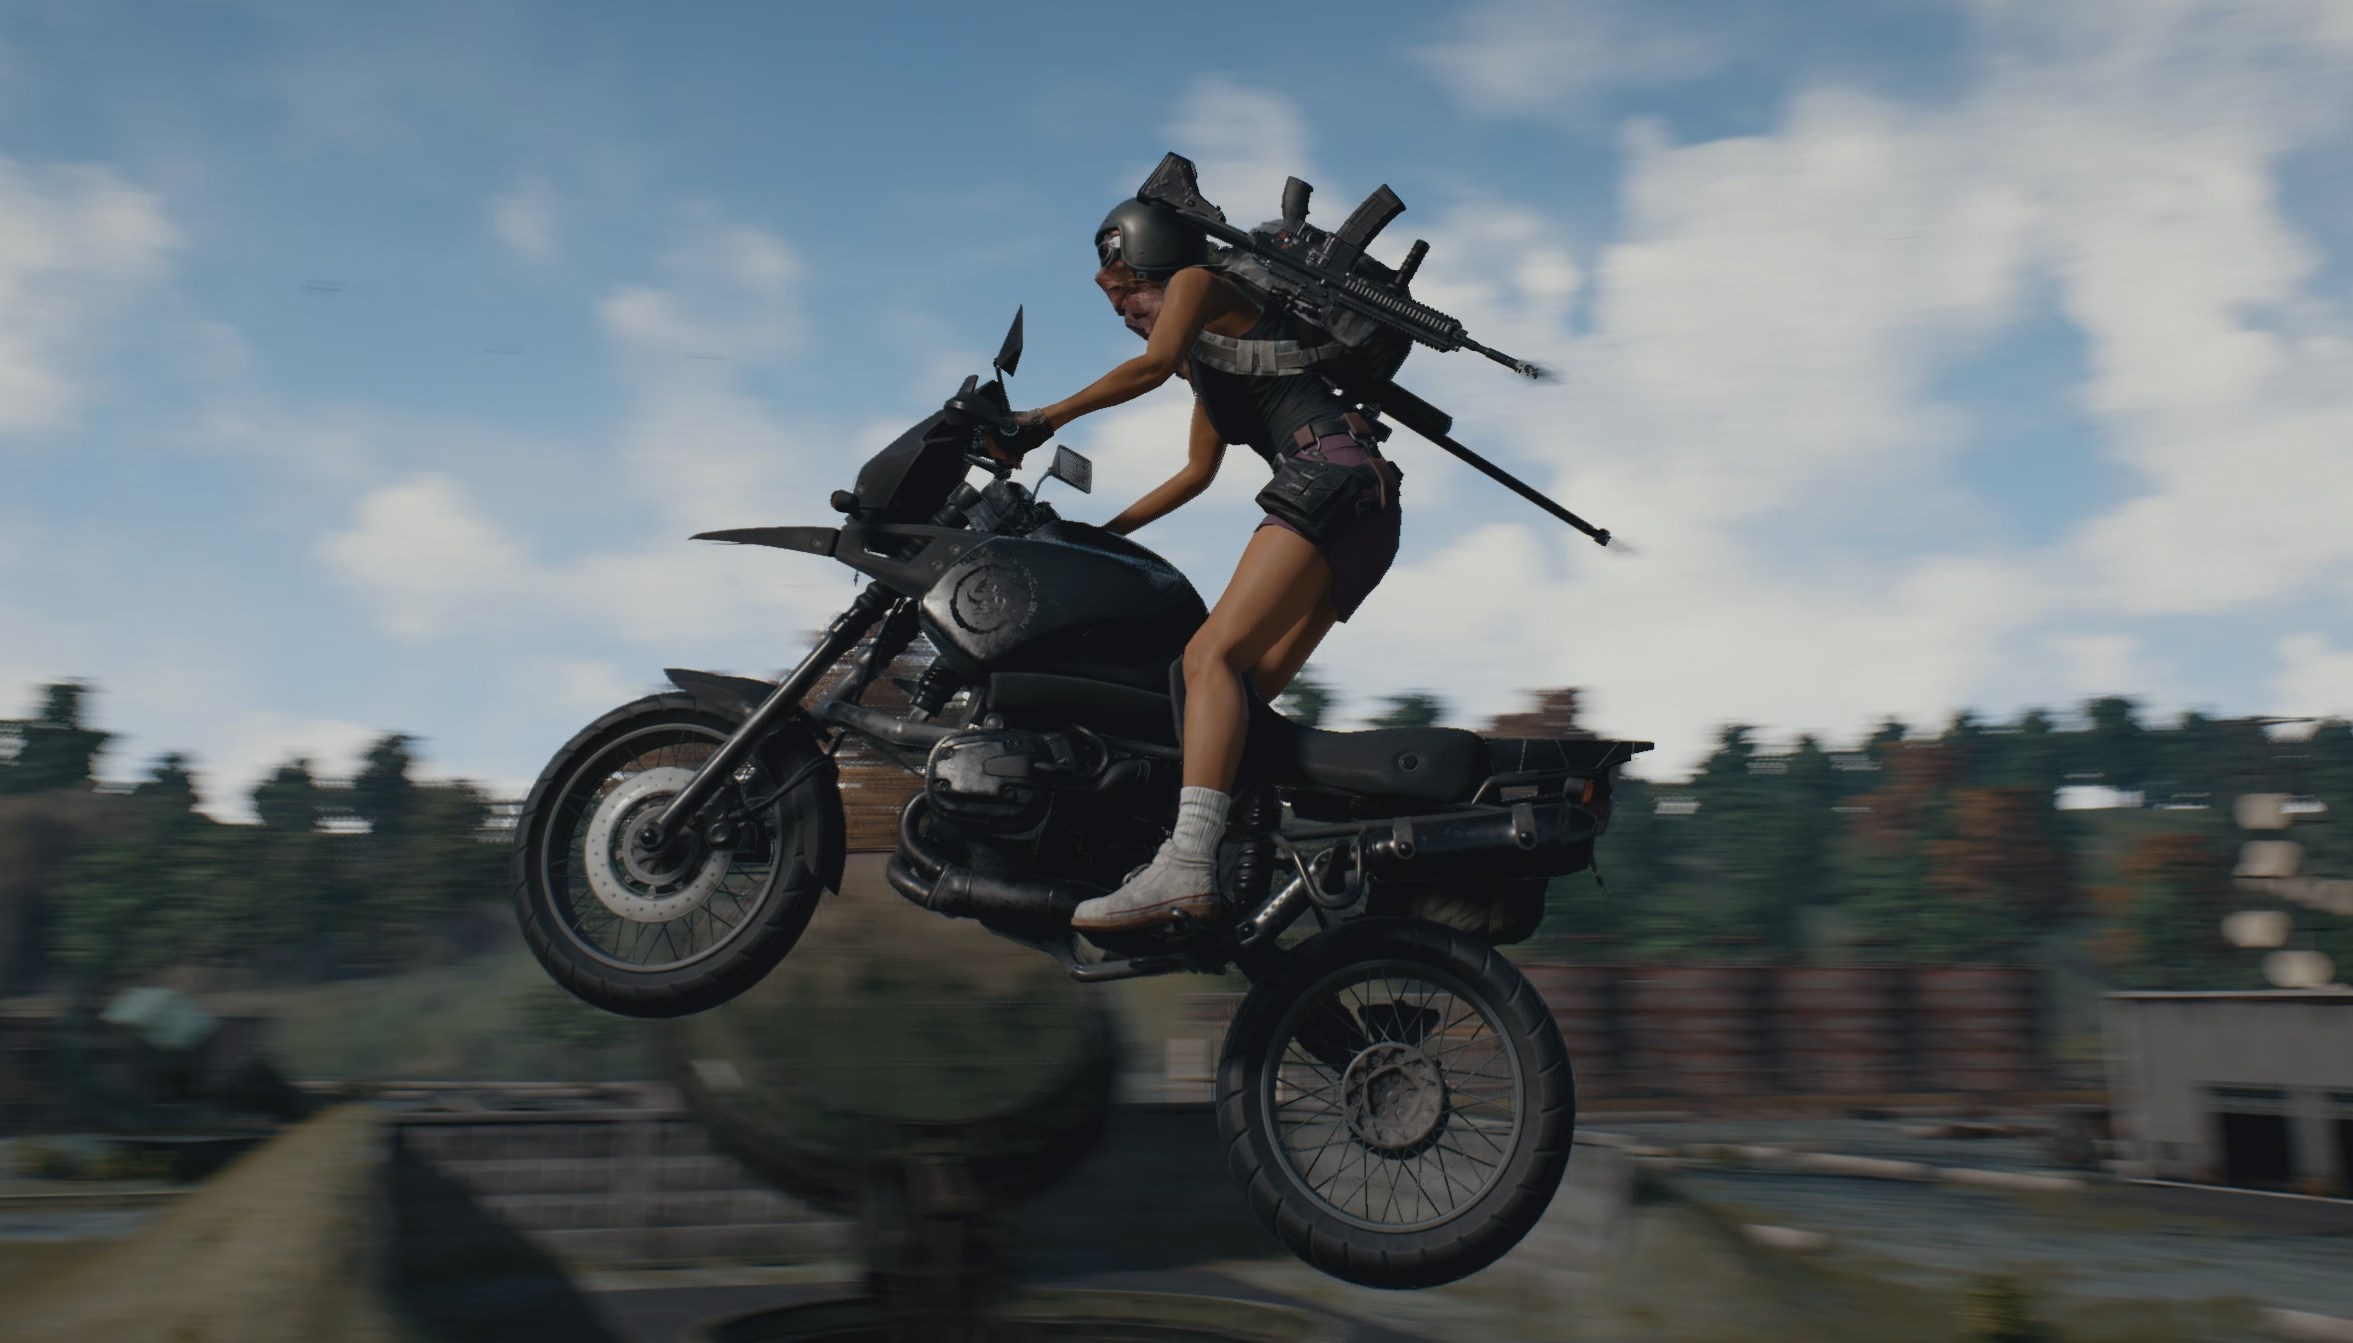 Playerunknown’s Battlegrounds has sold more than 20 million copies